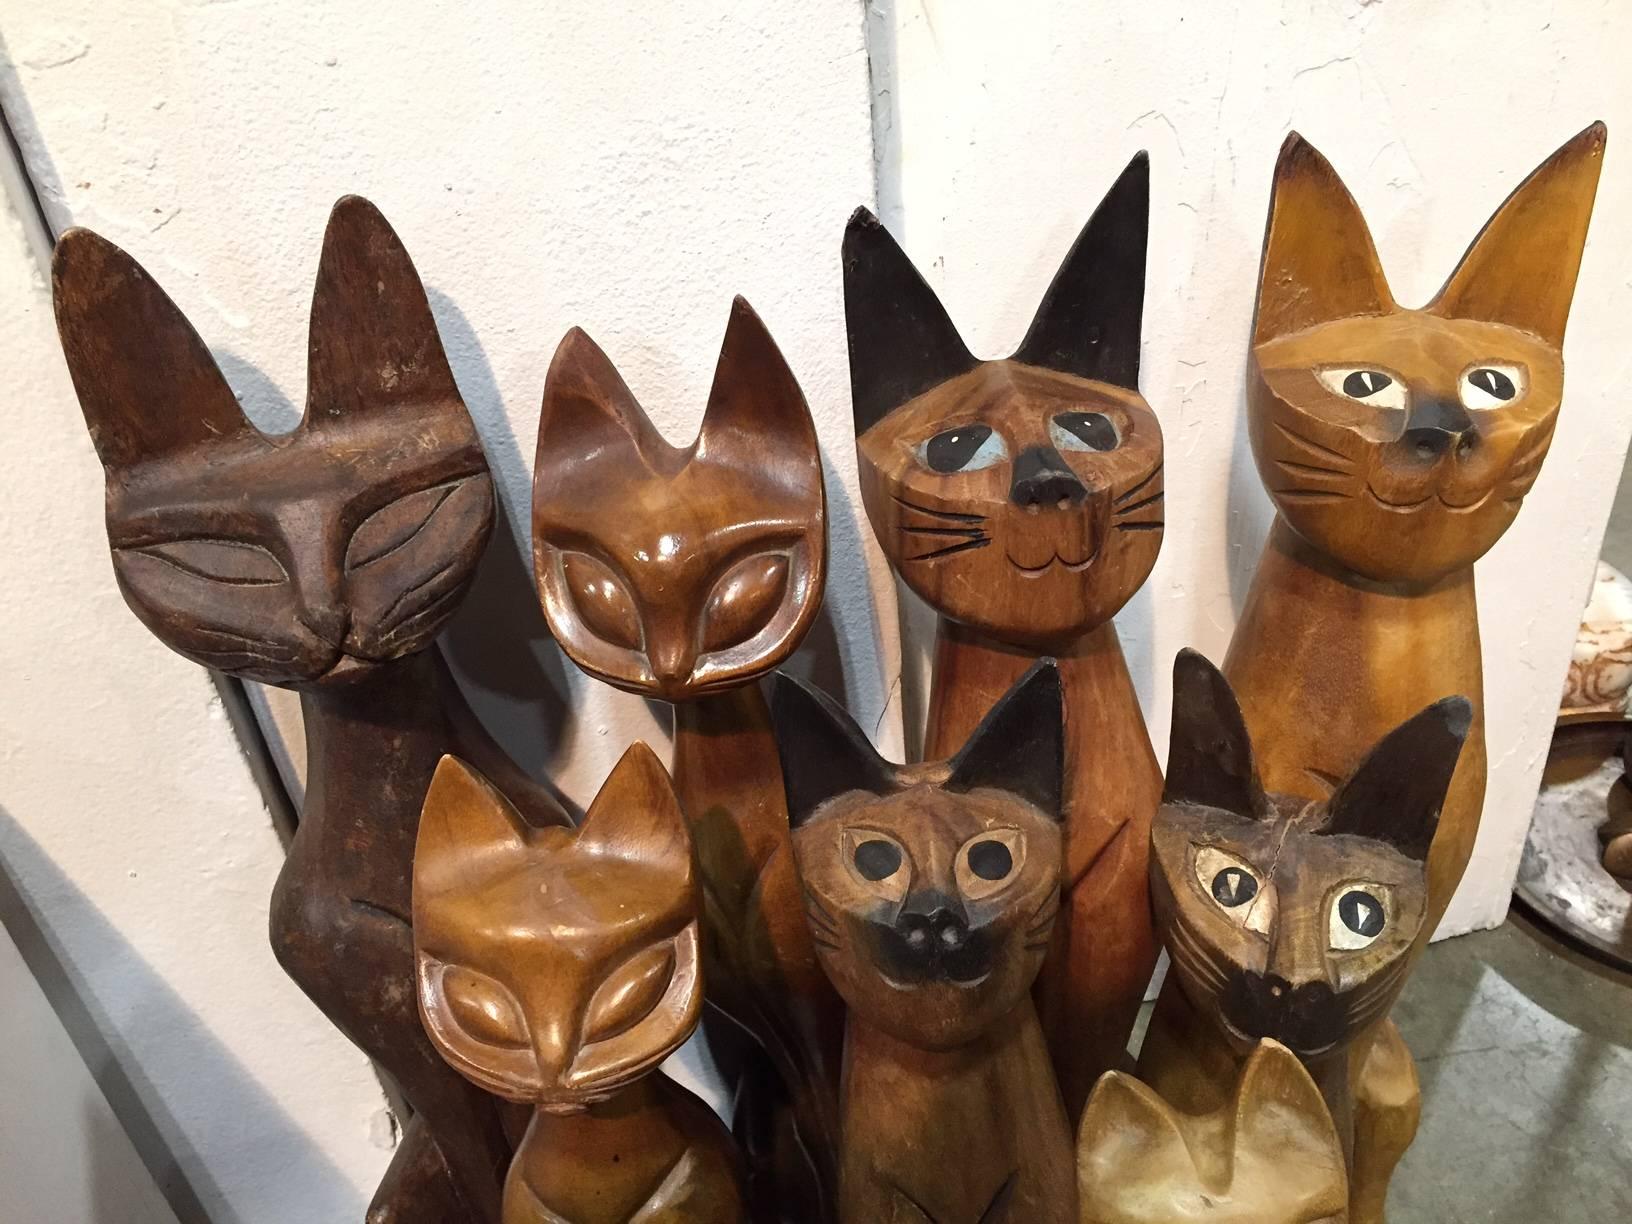 Here's a rare opportunity to acquire an Instant cat collection- 11 felines! We acquired these wonderful animals over the years from private collections. And now its time they find a new home and TLC.

They would be an ideal conversational group